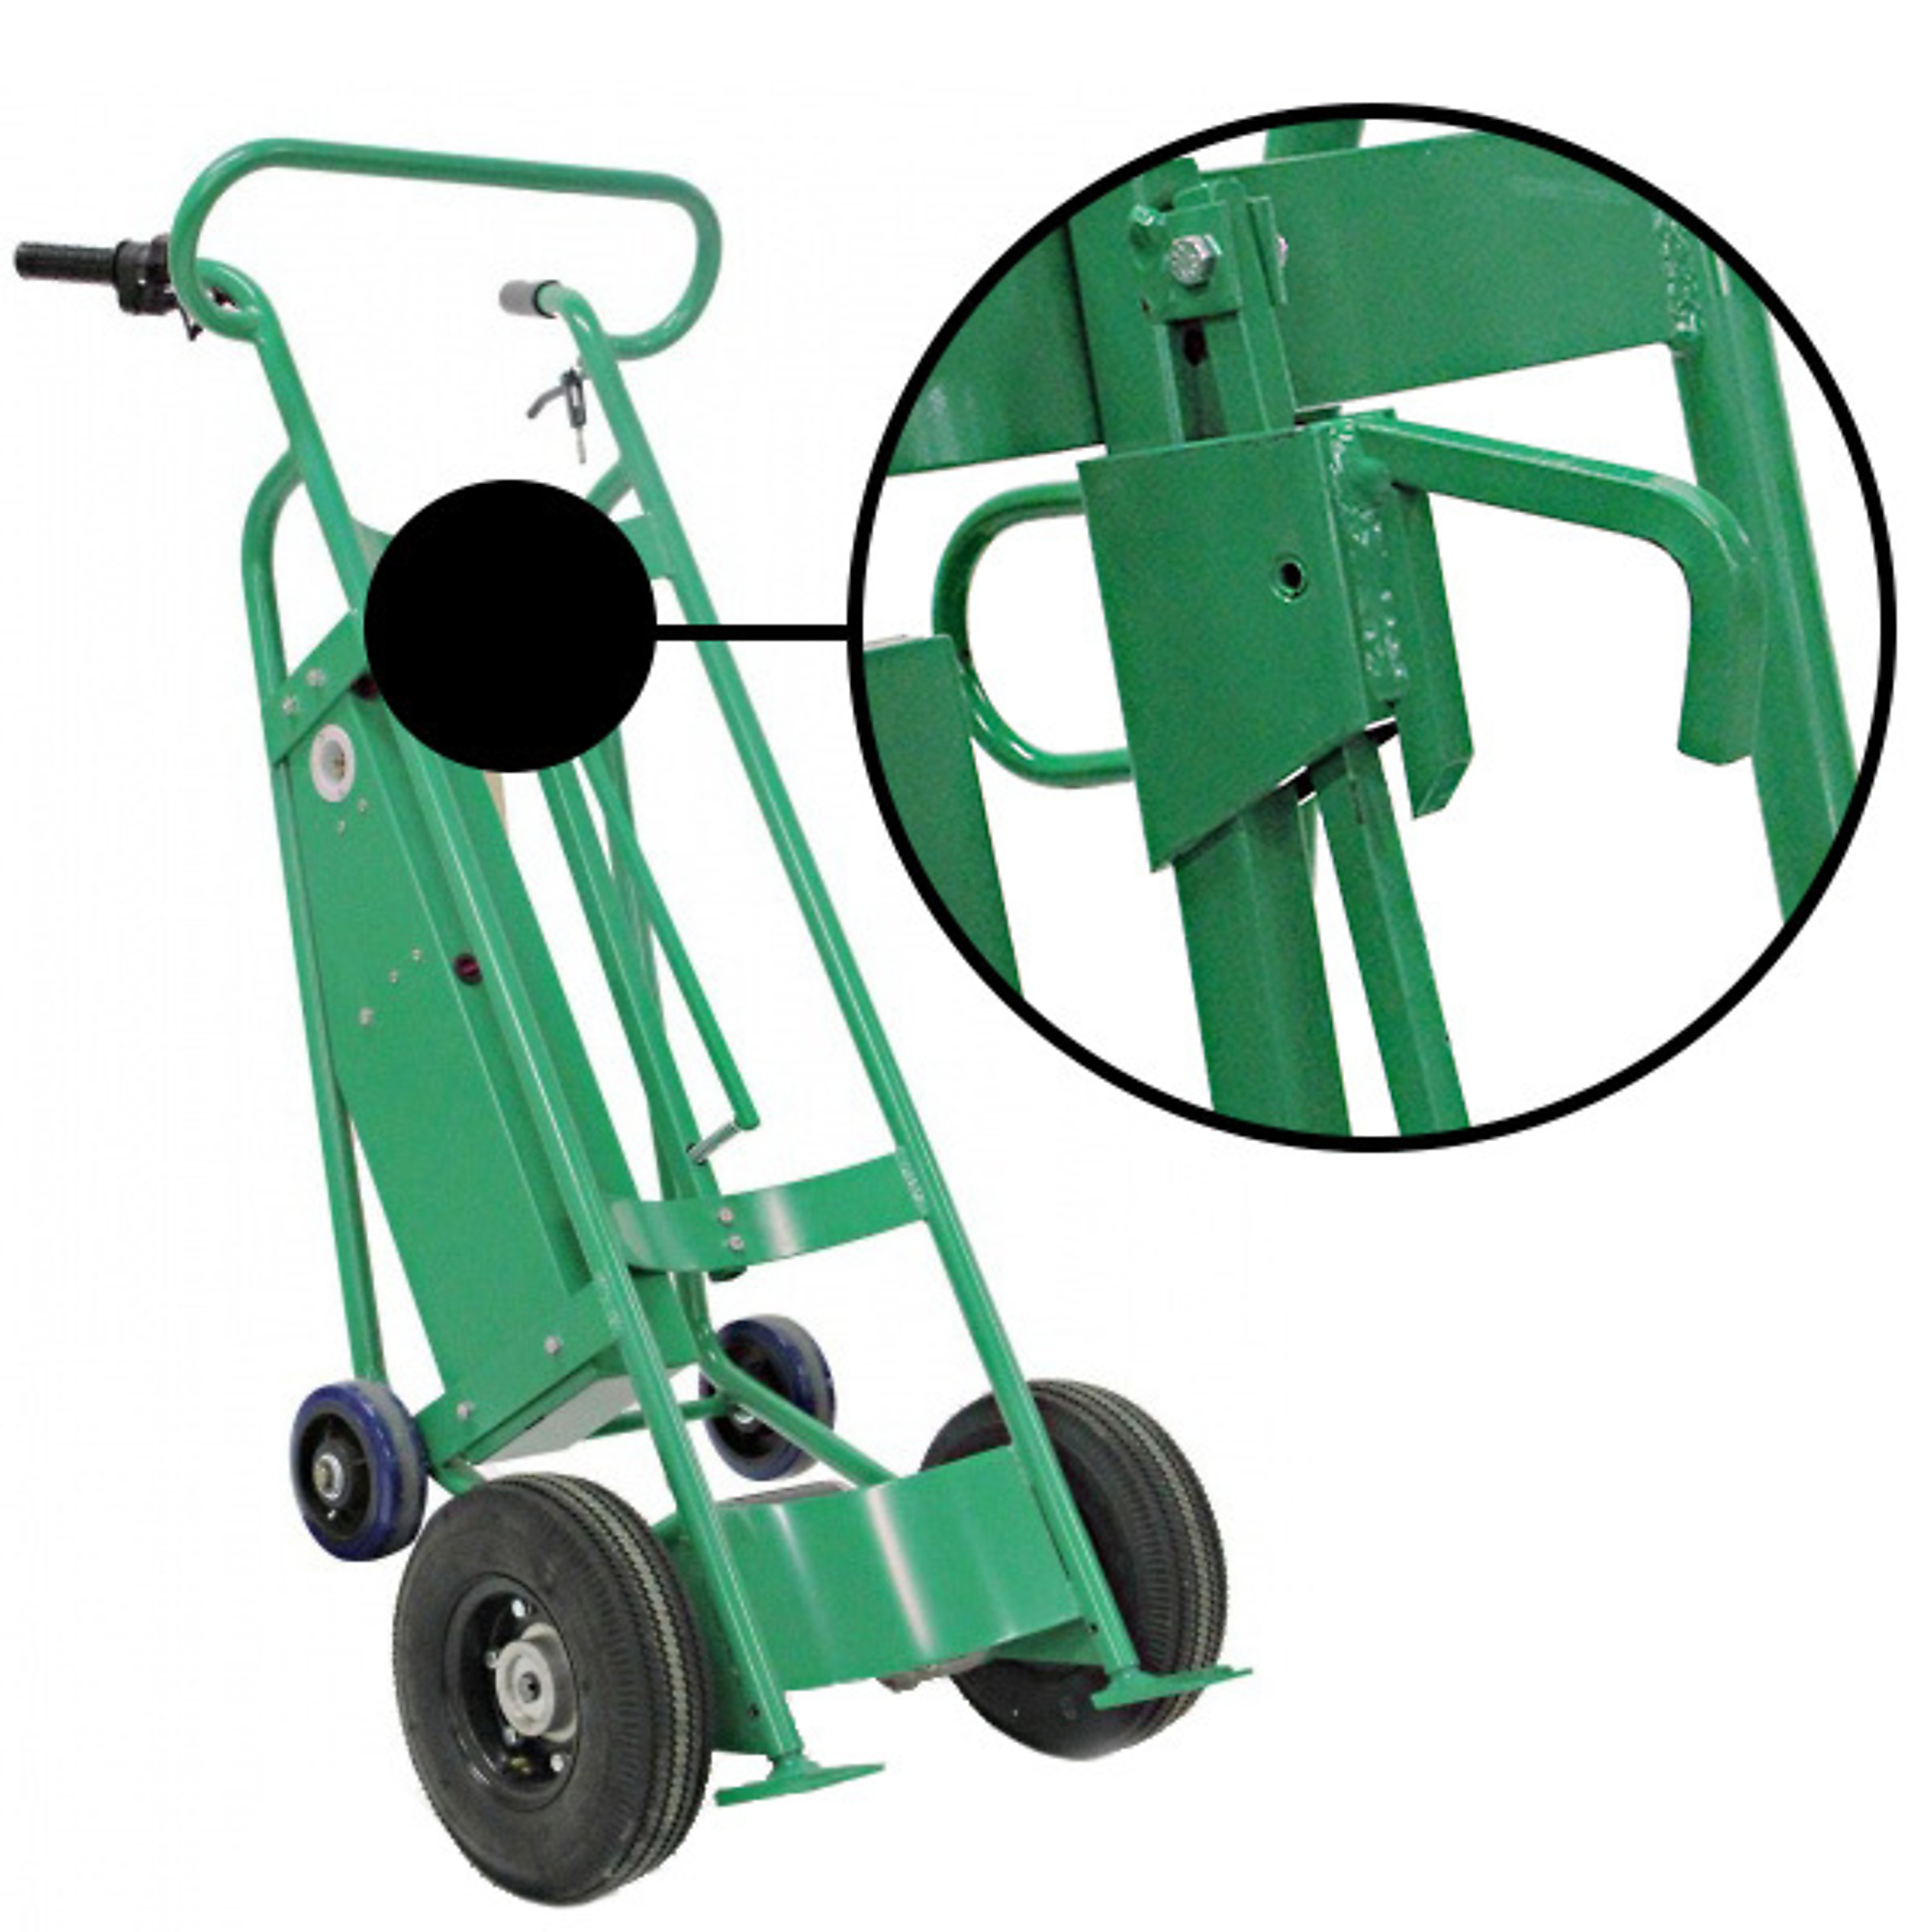 Valley Craft, Powered Drum Hand Truck, Load Capacity 800 lb, Height 60 in, Material Steel, Model F89484L